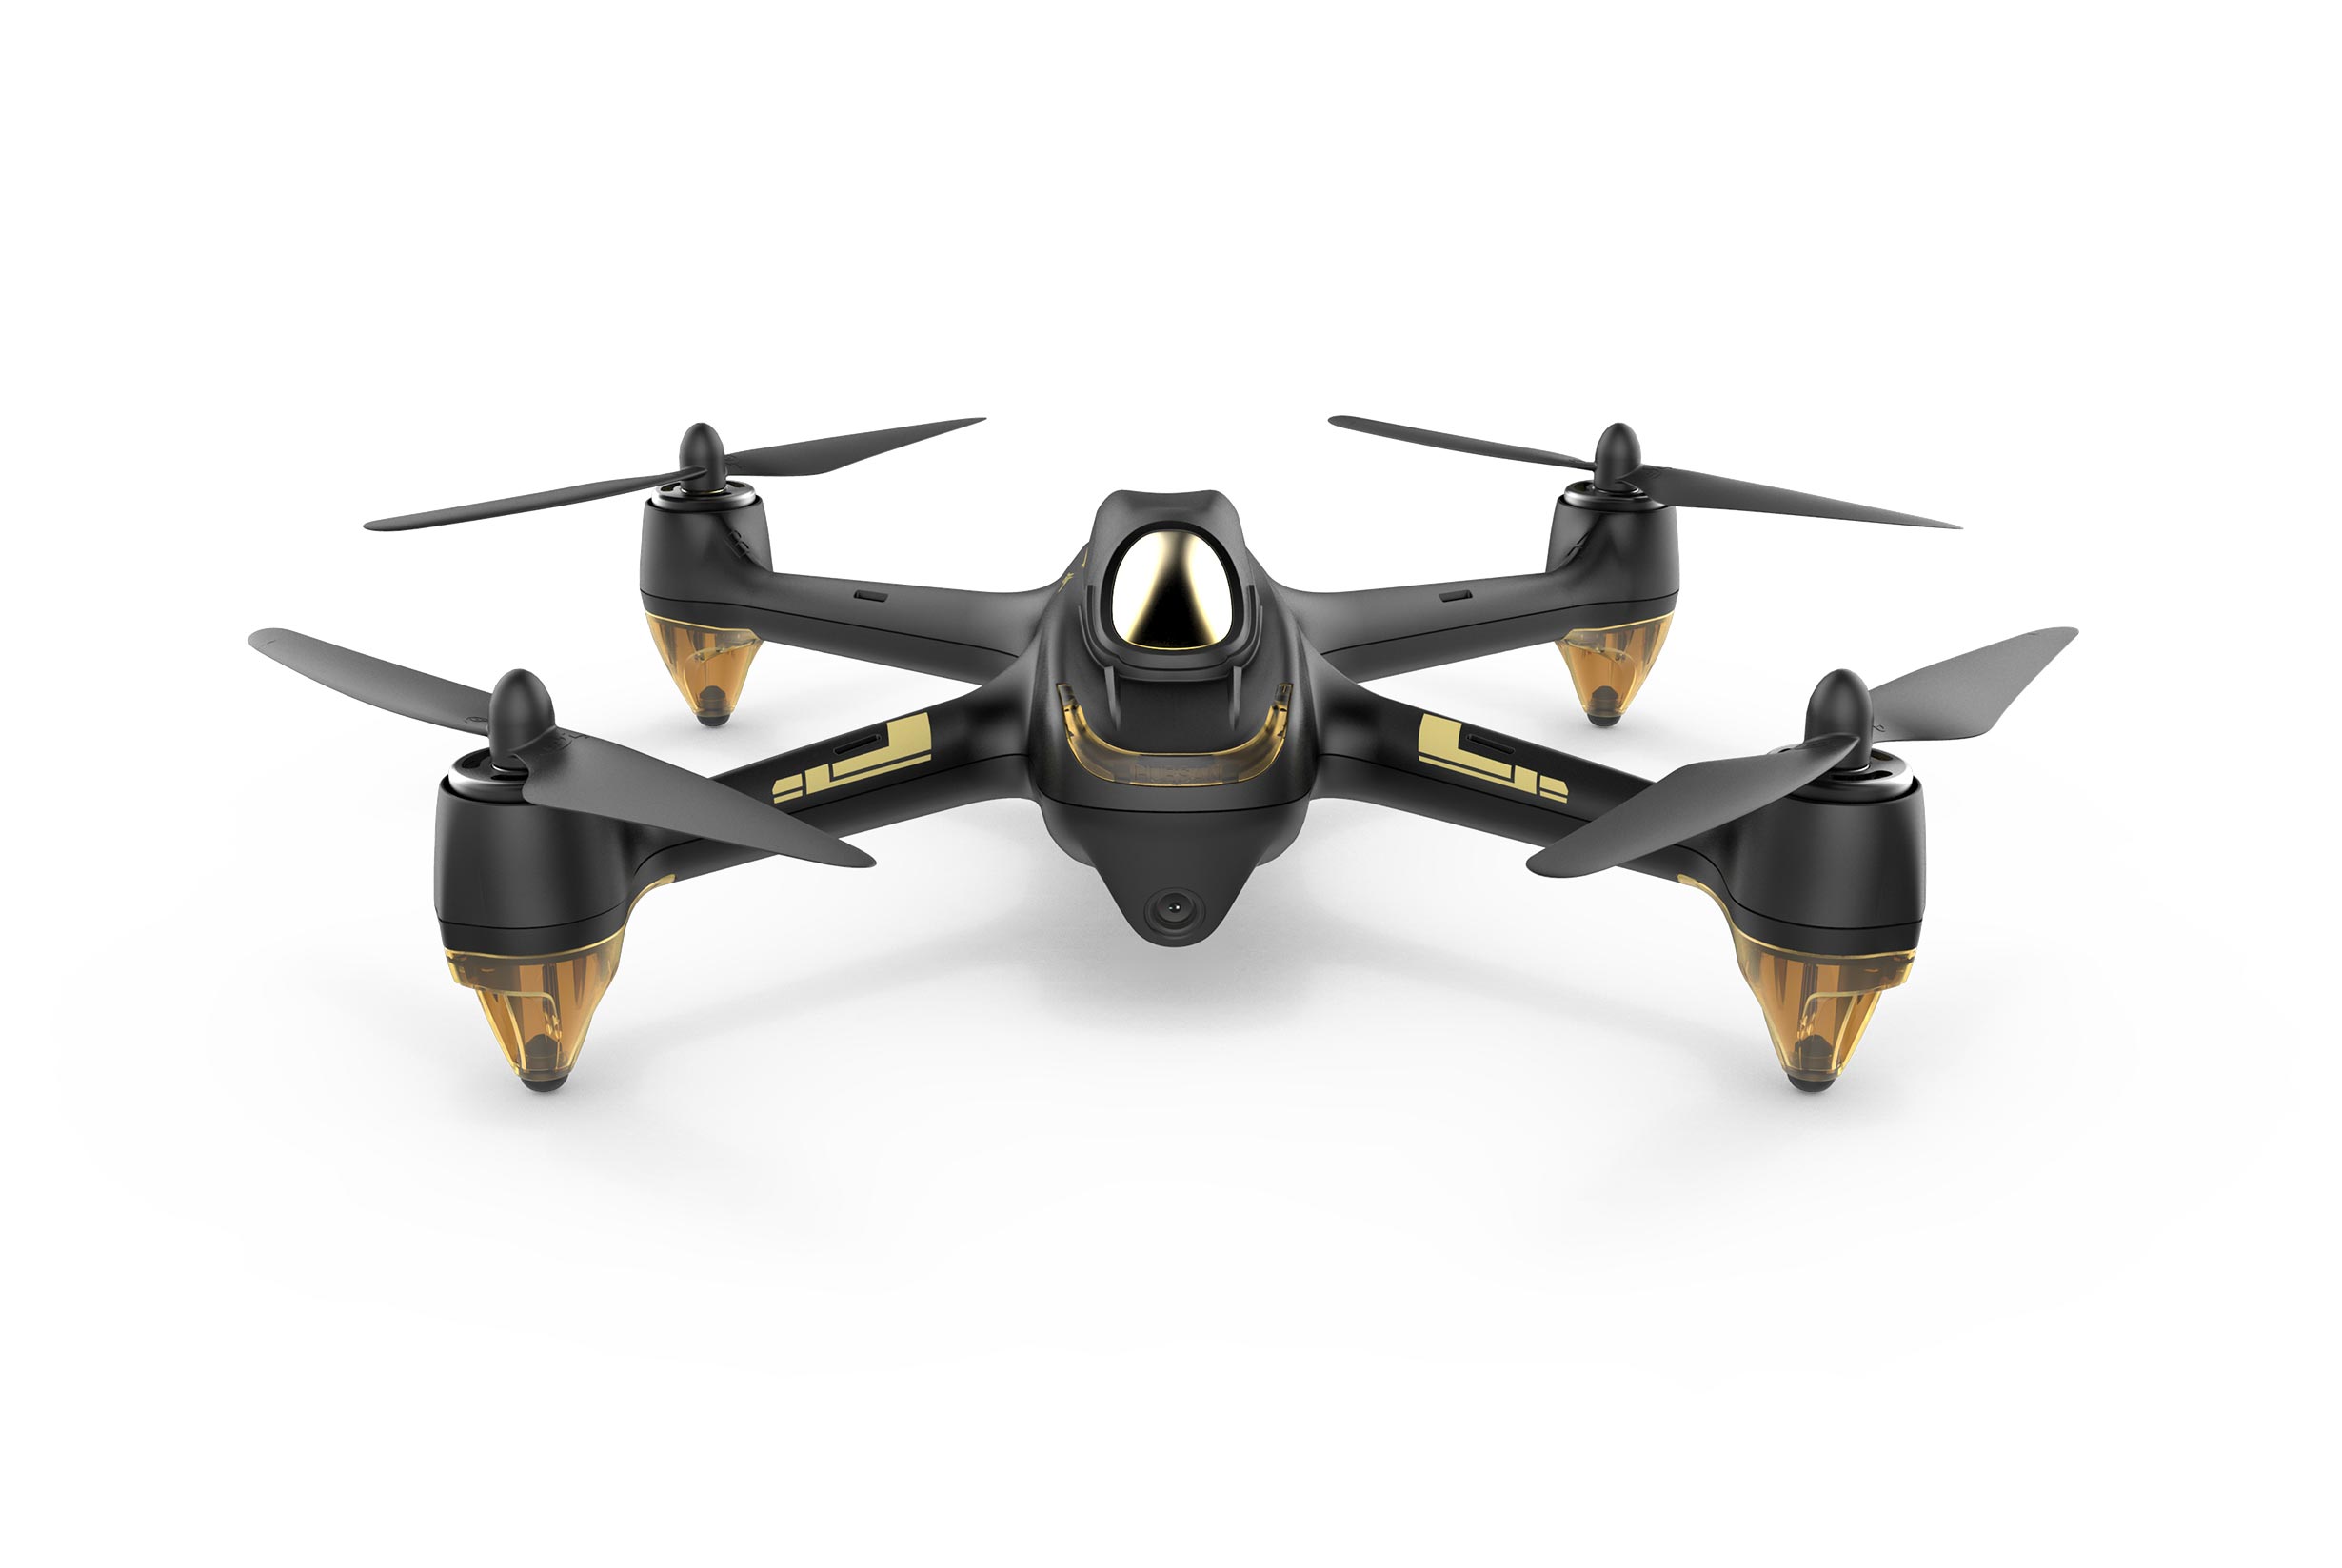 Hubsan H501S S Pro 5.8G FPV RC Drone Quadcopter 1080P Brushless Follow Me GPS US 